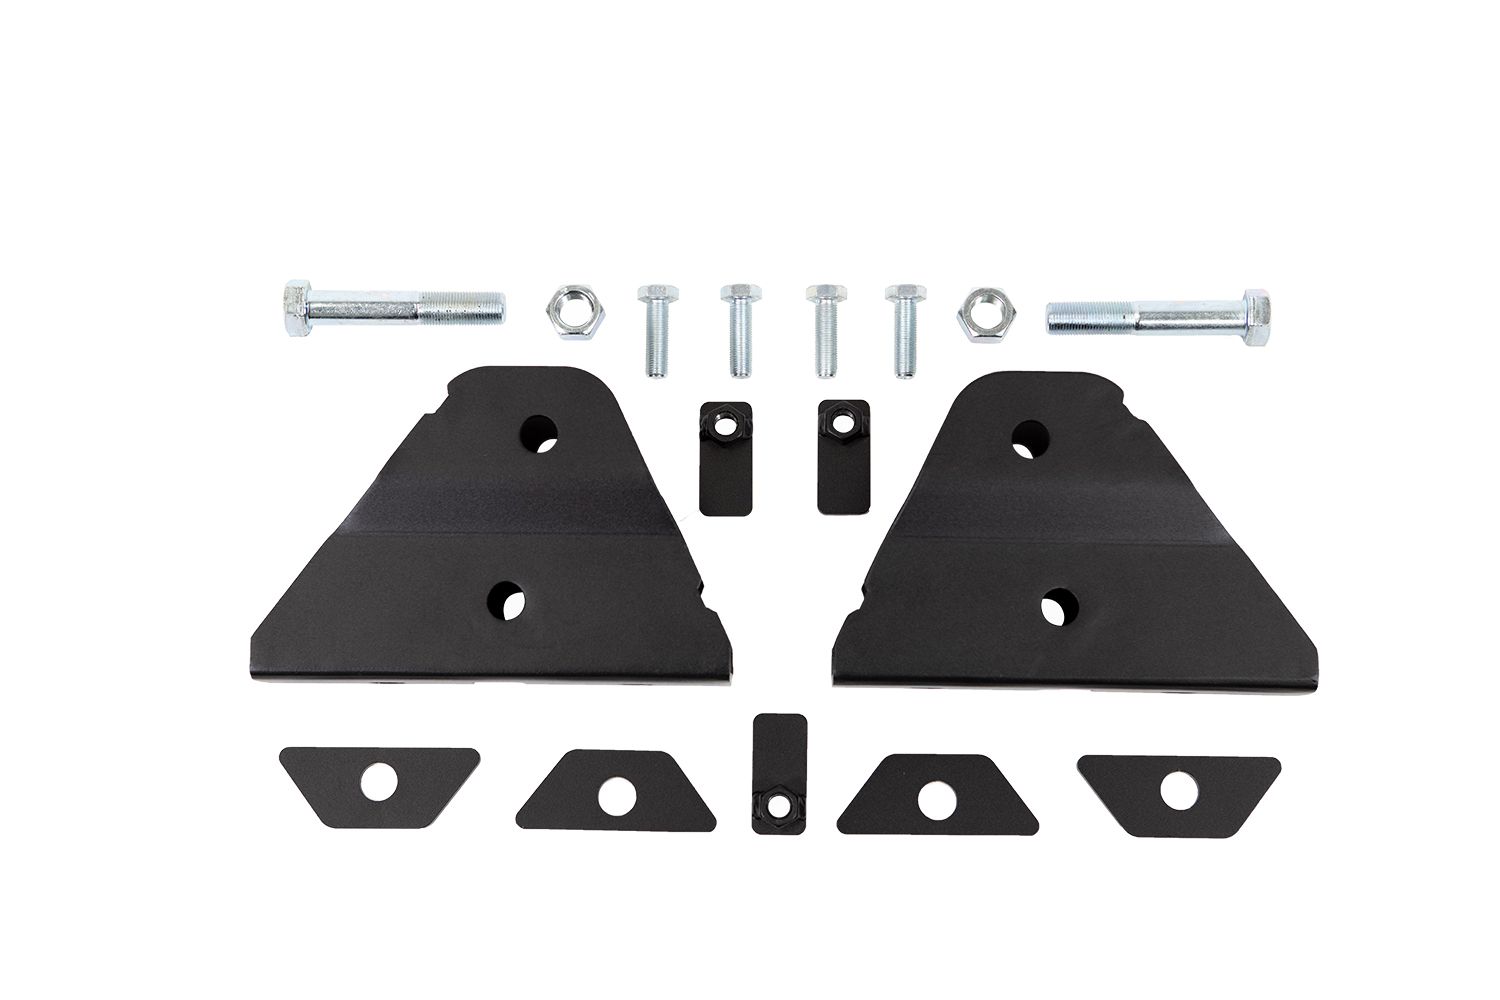 Radius Arm Drop Box Brackets Suited for Toyota 80 Series Land Cruiser/Lexus LX450 Questions & Answers